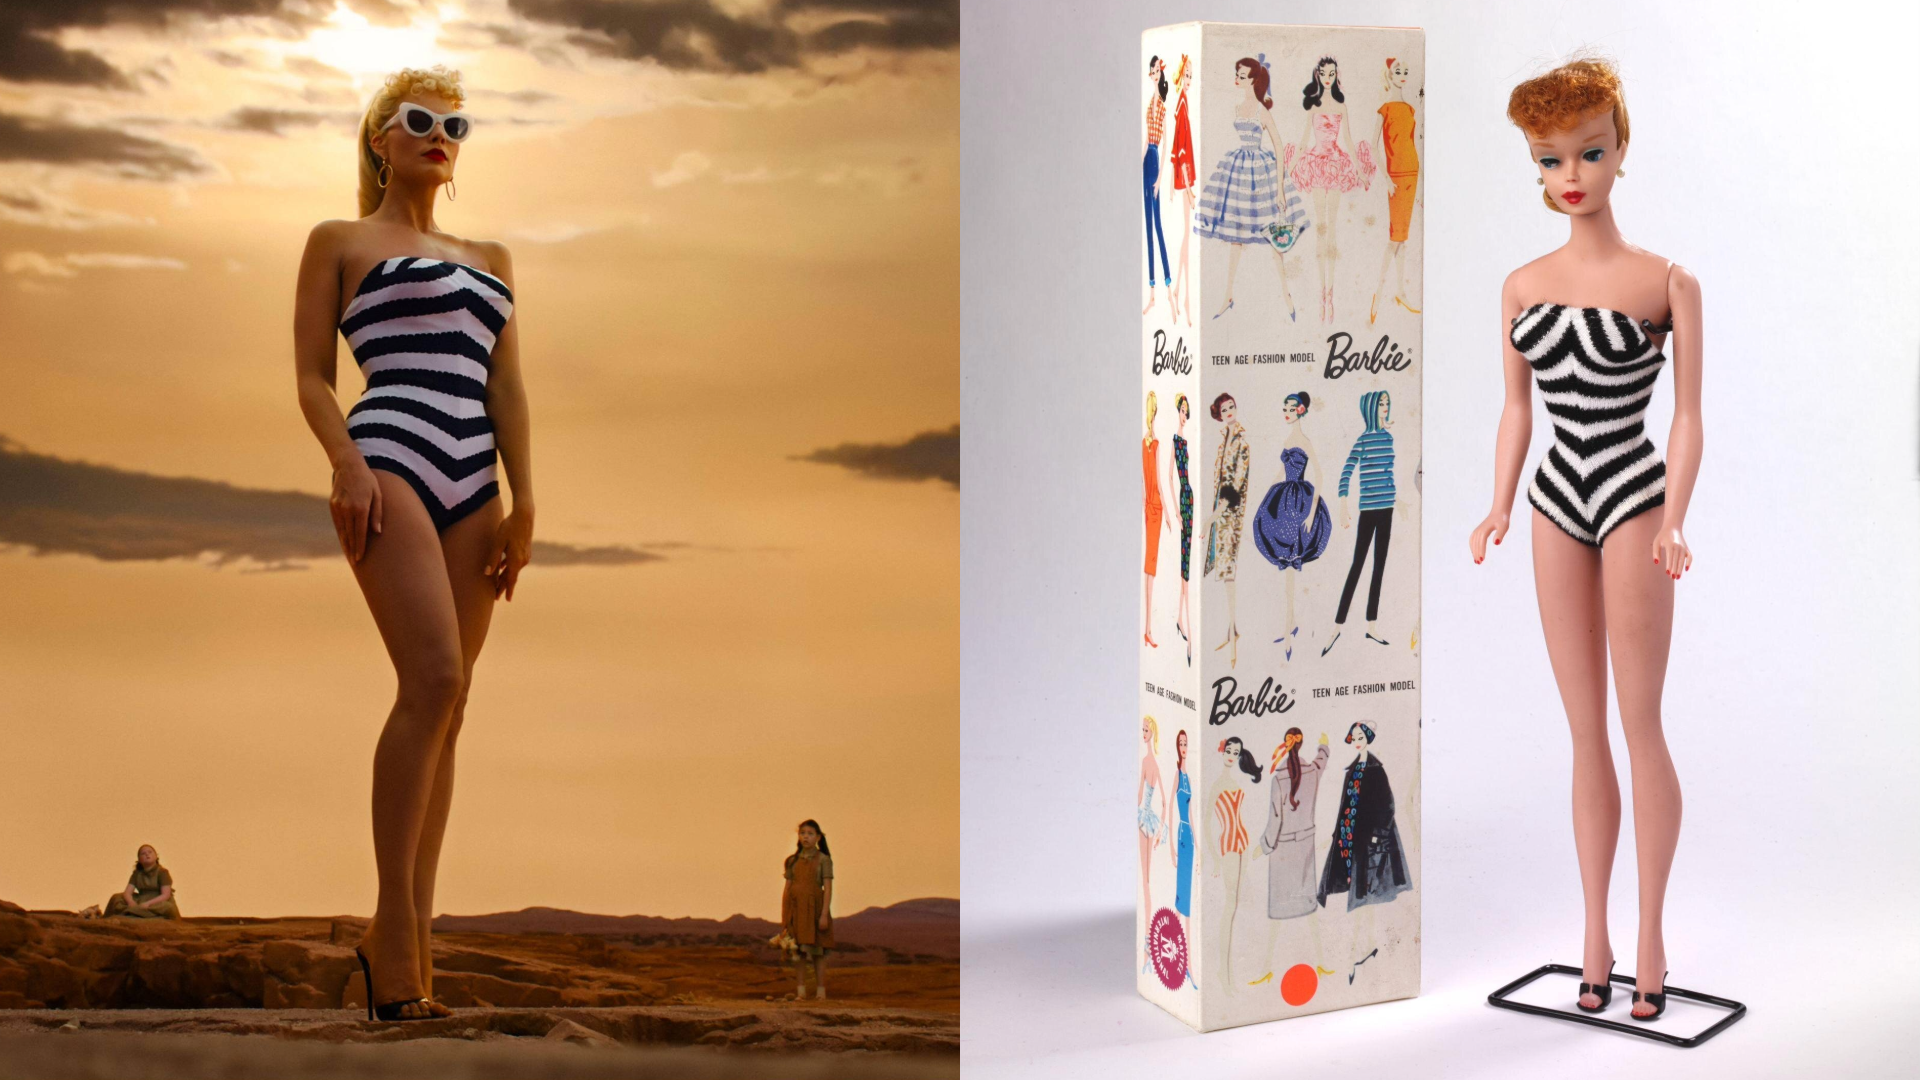 A photograph of Margot Robbie as Barbie in the movie Barbie dressed in a black and white striped swimsuit with a desert in the background alongside a photograph of the first ever Barbie doll from 1959 wearing a black and white swimsuit next to the box on a white background